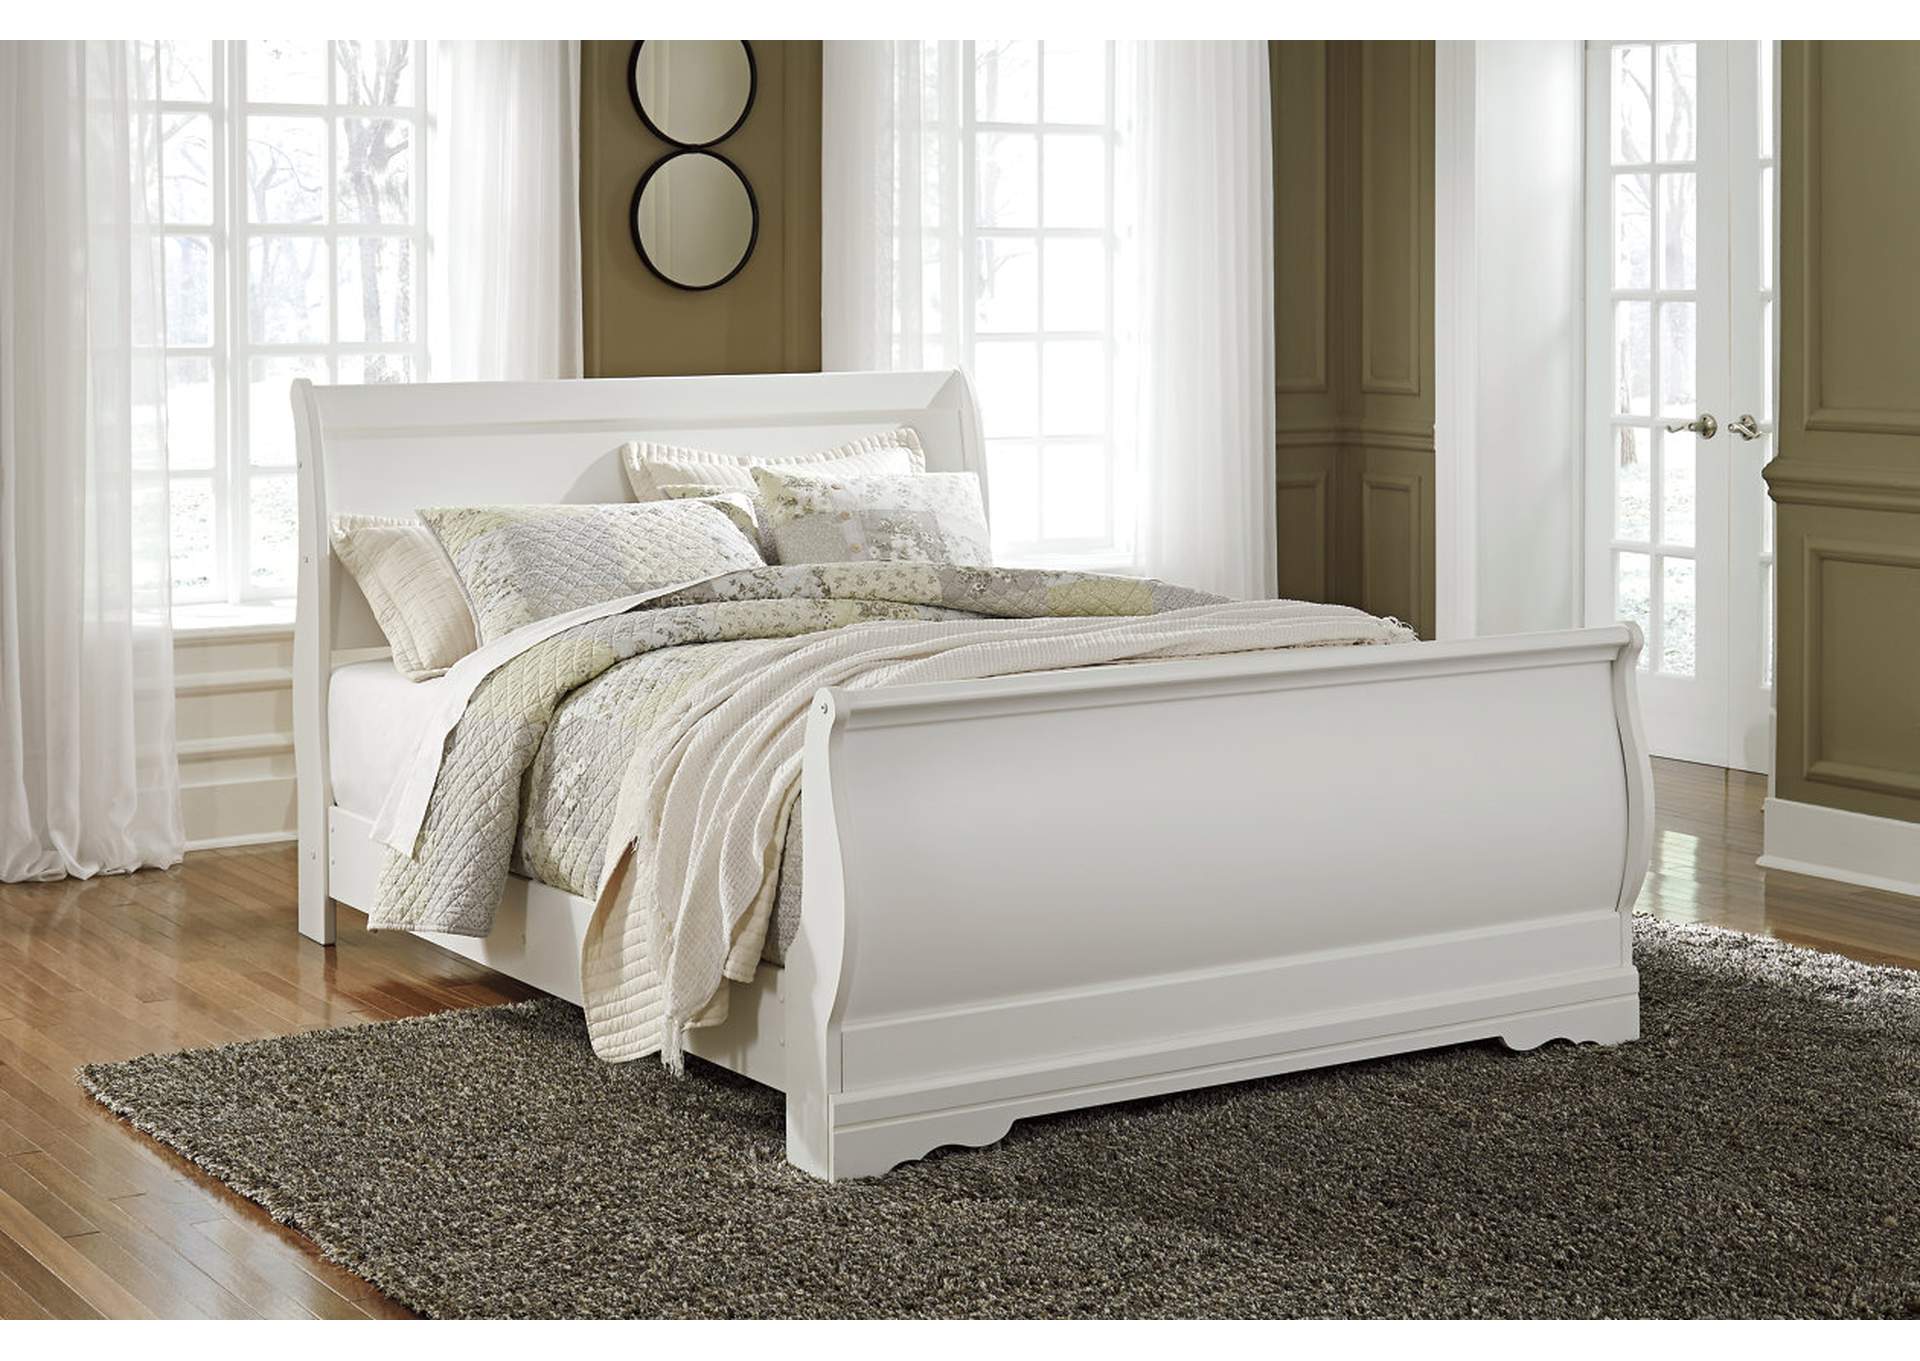 Anarasia Queen Sleigh Bed with Mirrored Dresser and Nightstand,Signature Design By Ashley